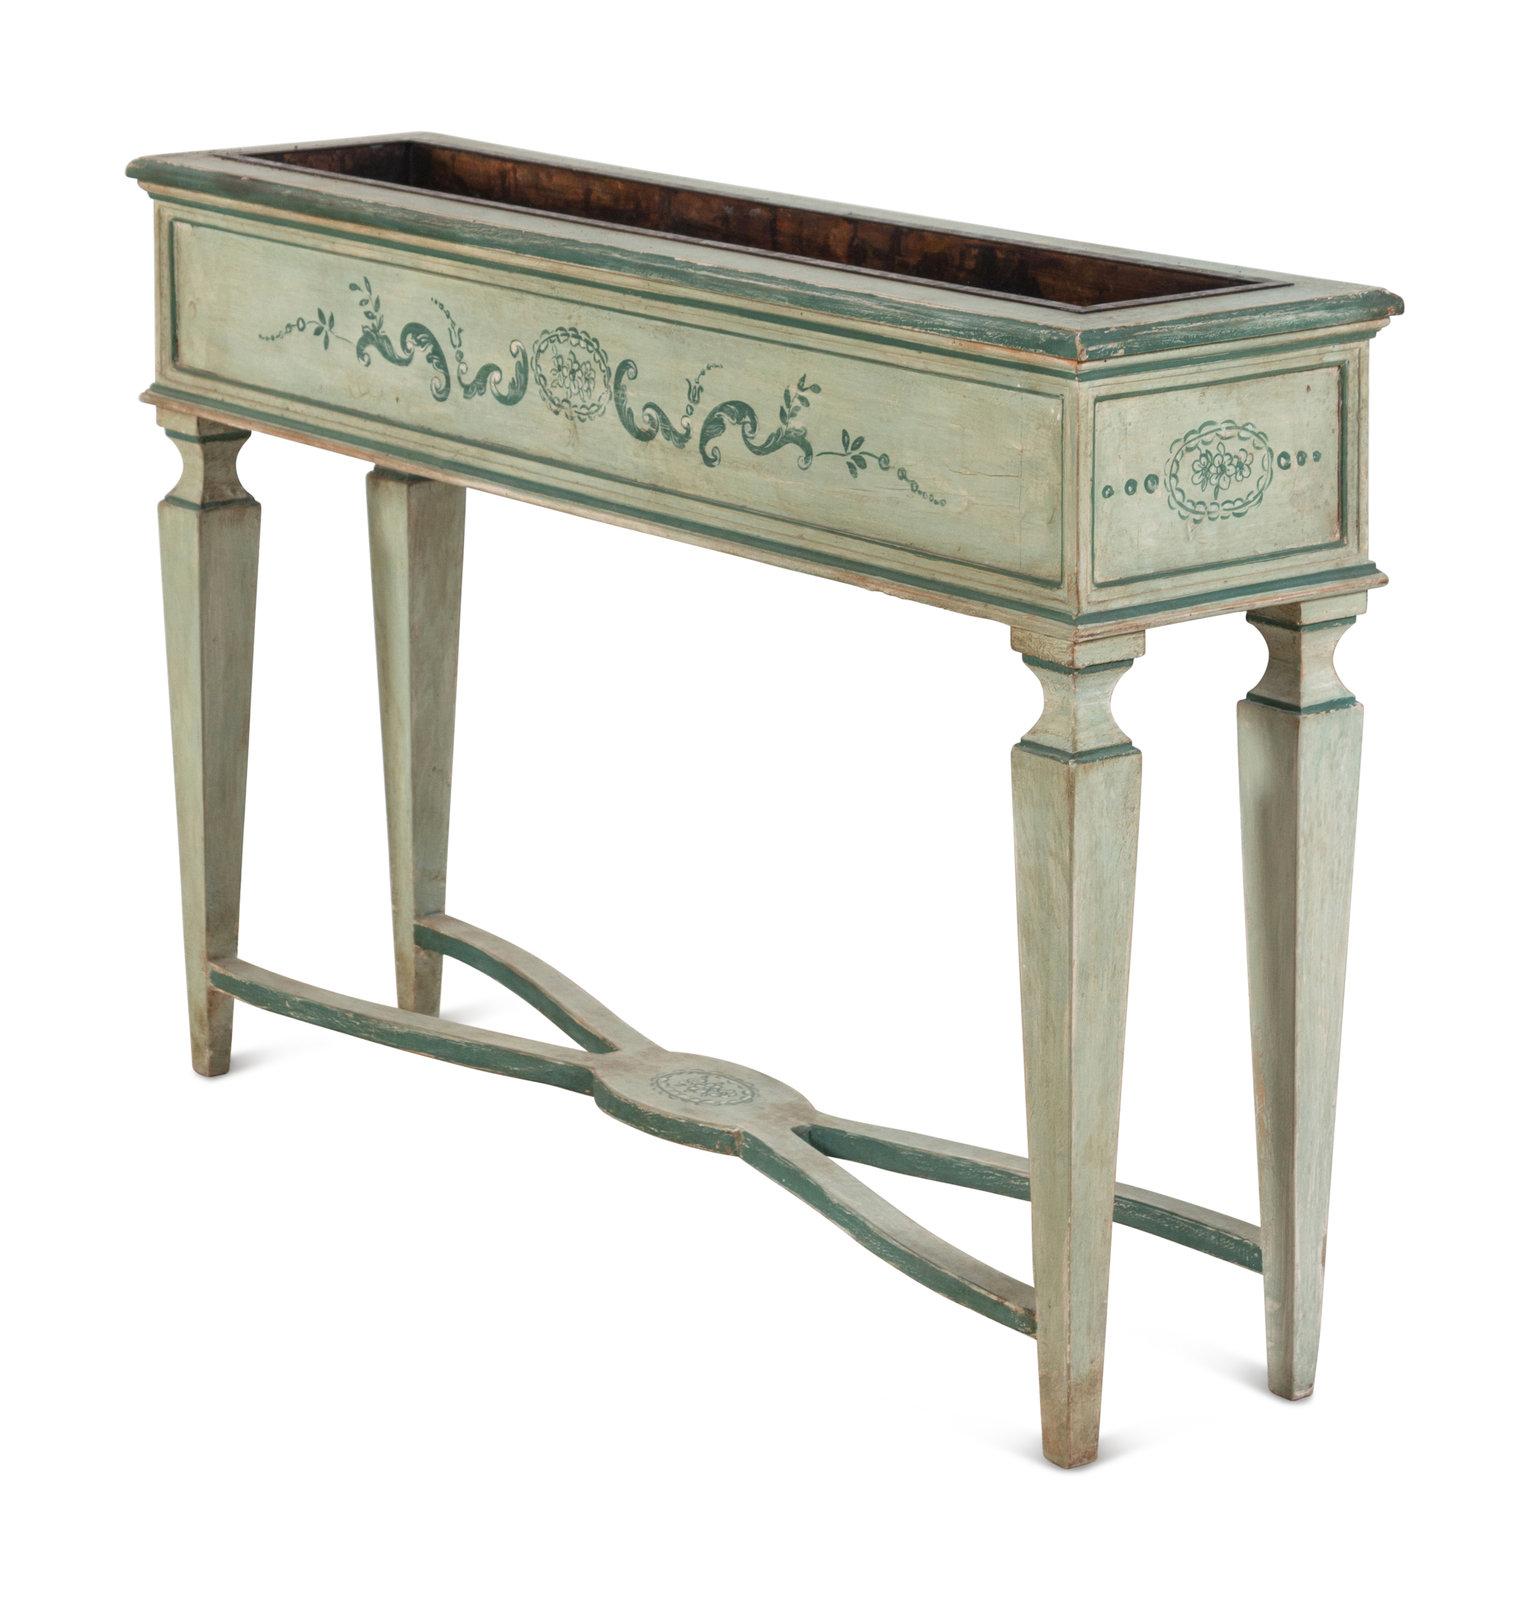 Italian Painted Jardinière with Interior Metal Liner, Early 20th Century  In Good Condition For Sale In Savannah, GA